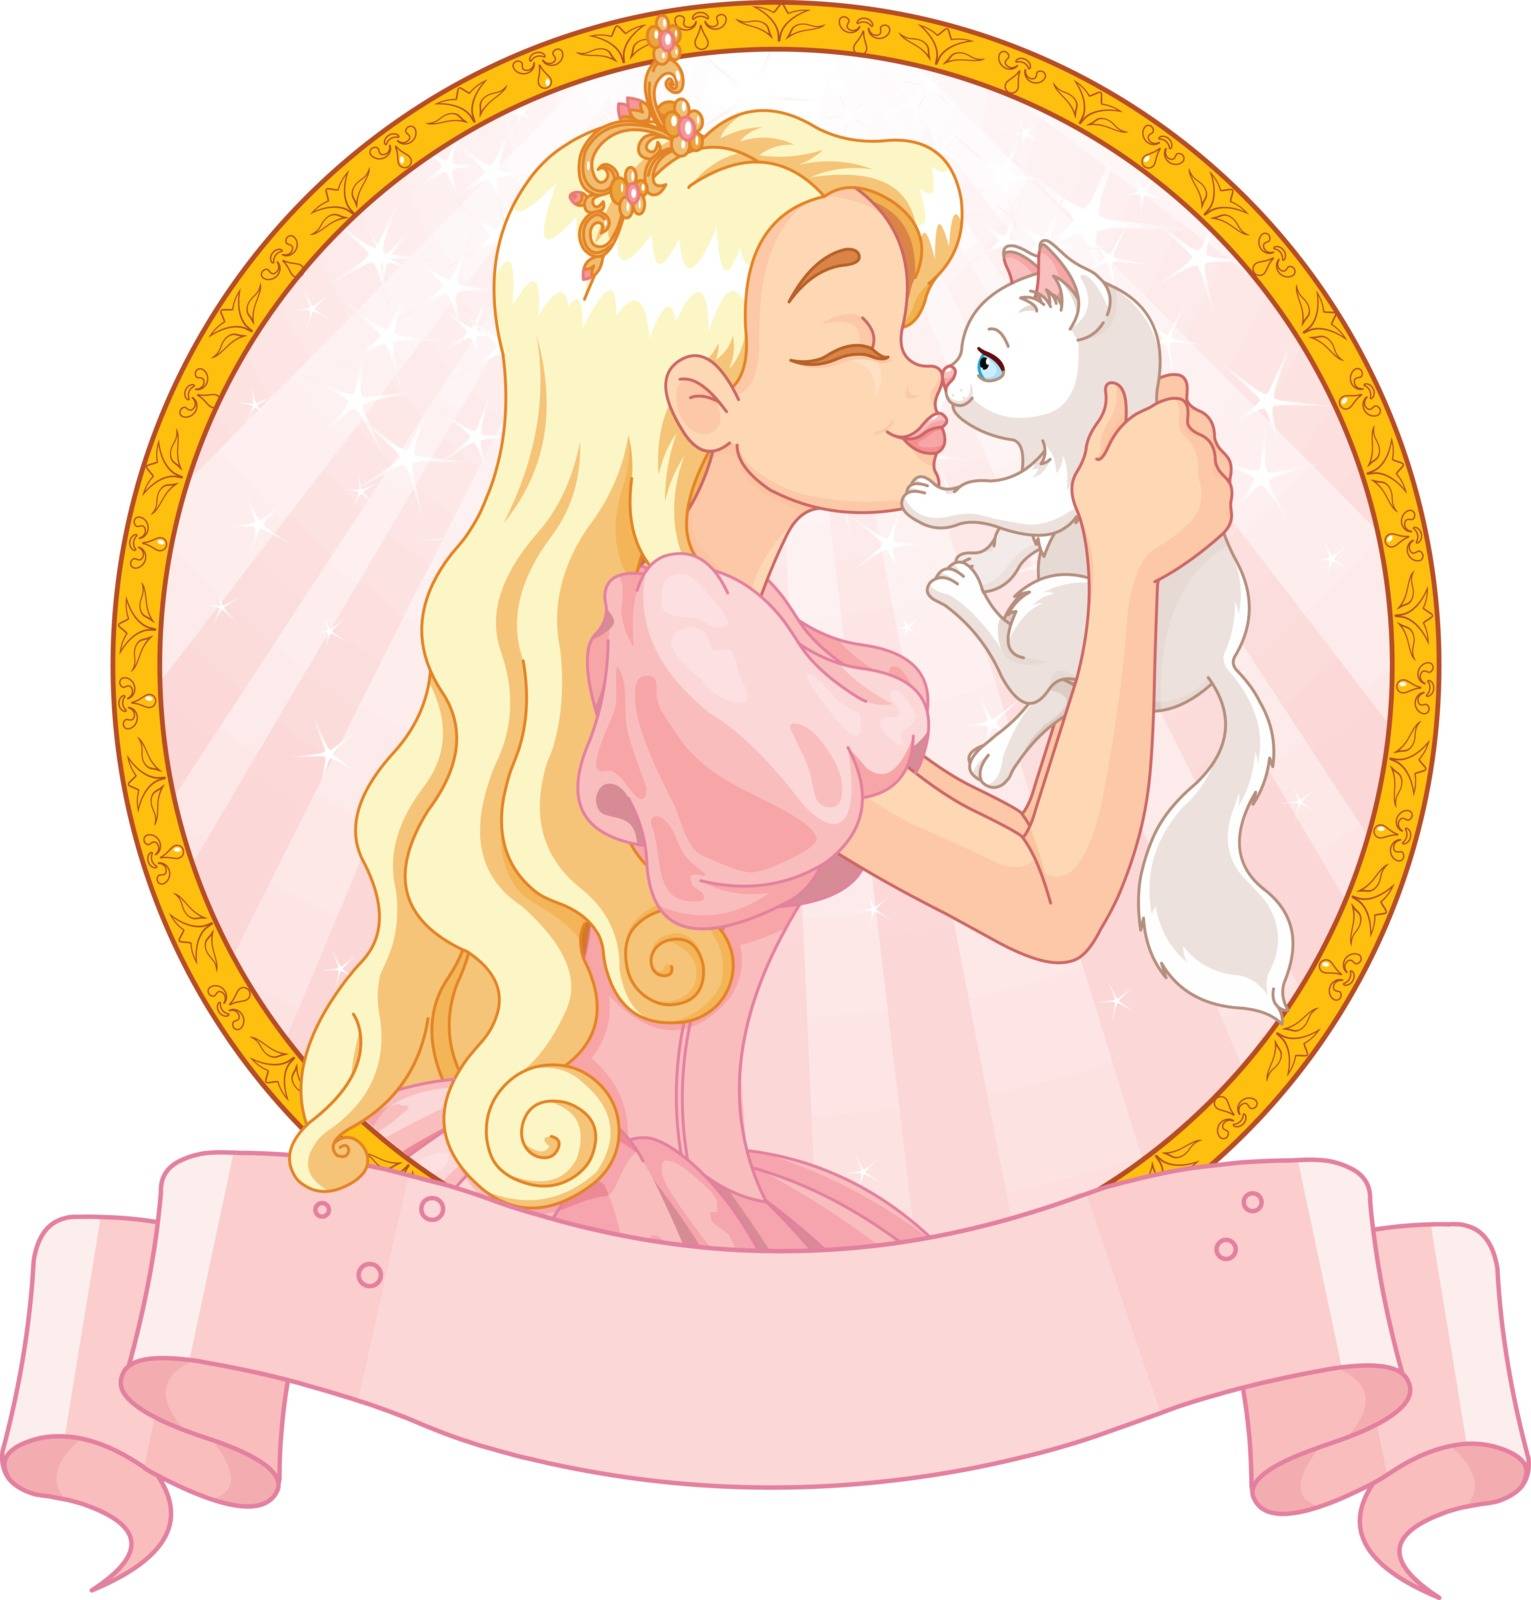 Fairytale Princess is kissing a white cat